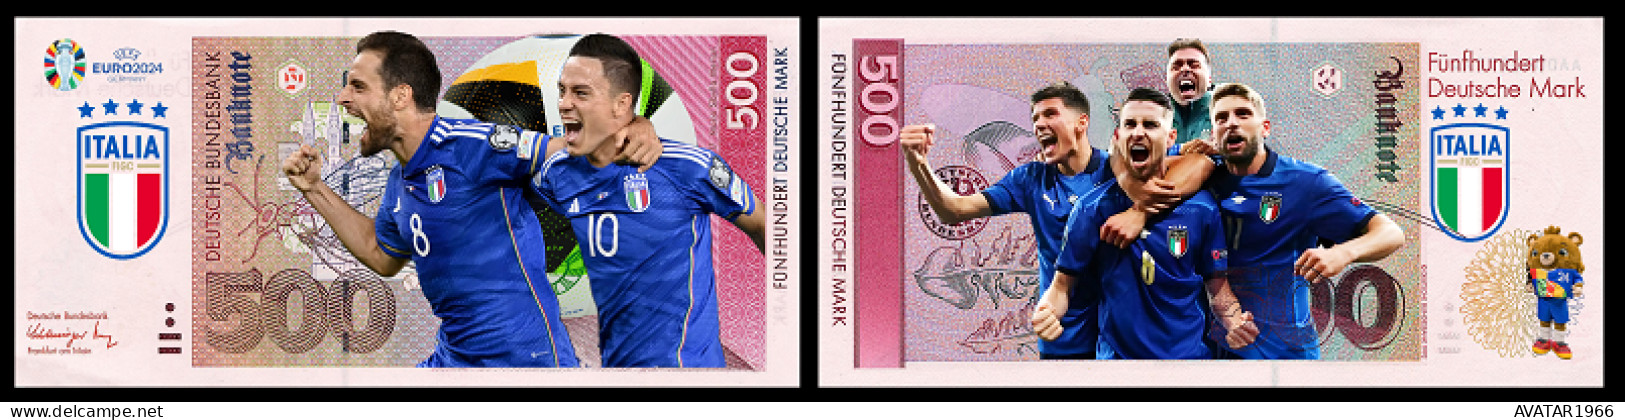 UEFA European Football Championship 2024 qualified country  Italy  8 pieces Germany fantasy paper money